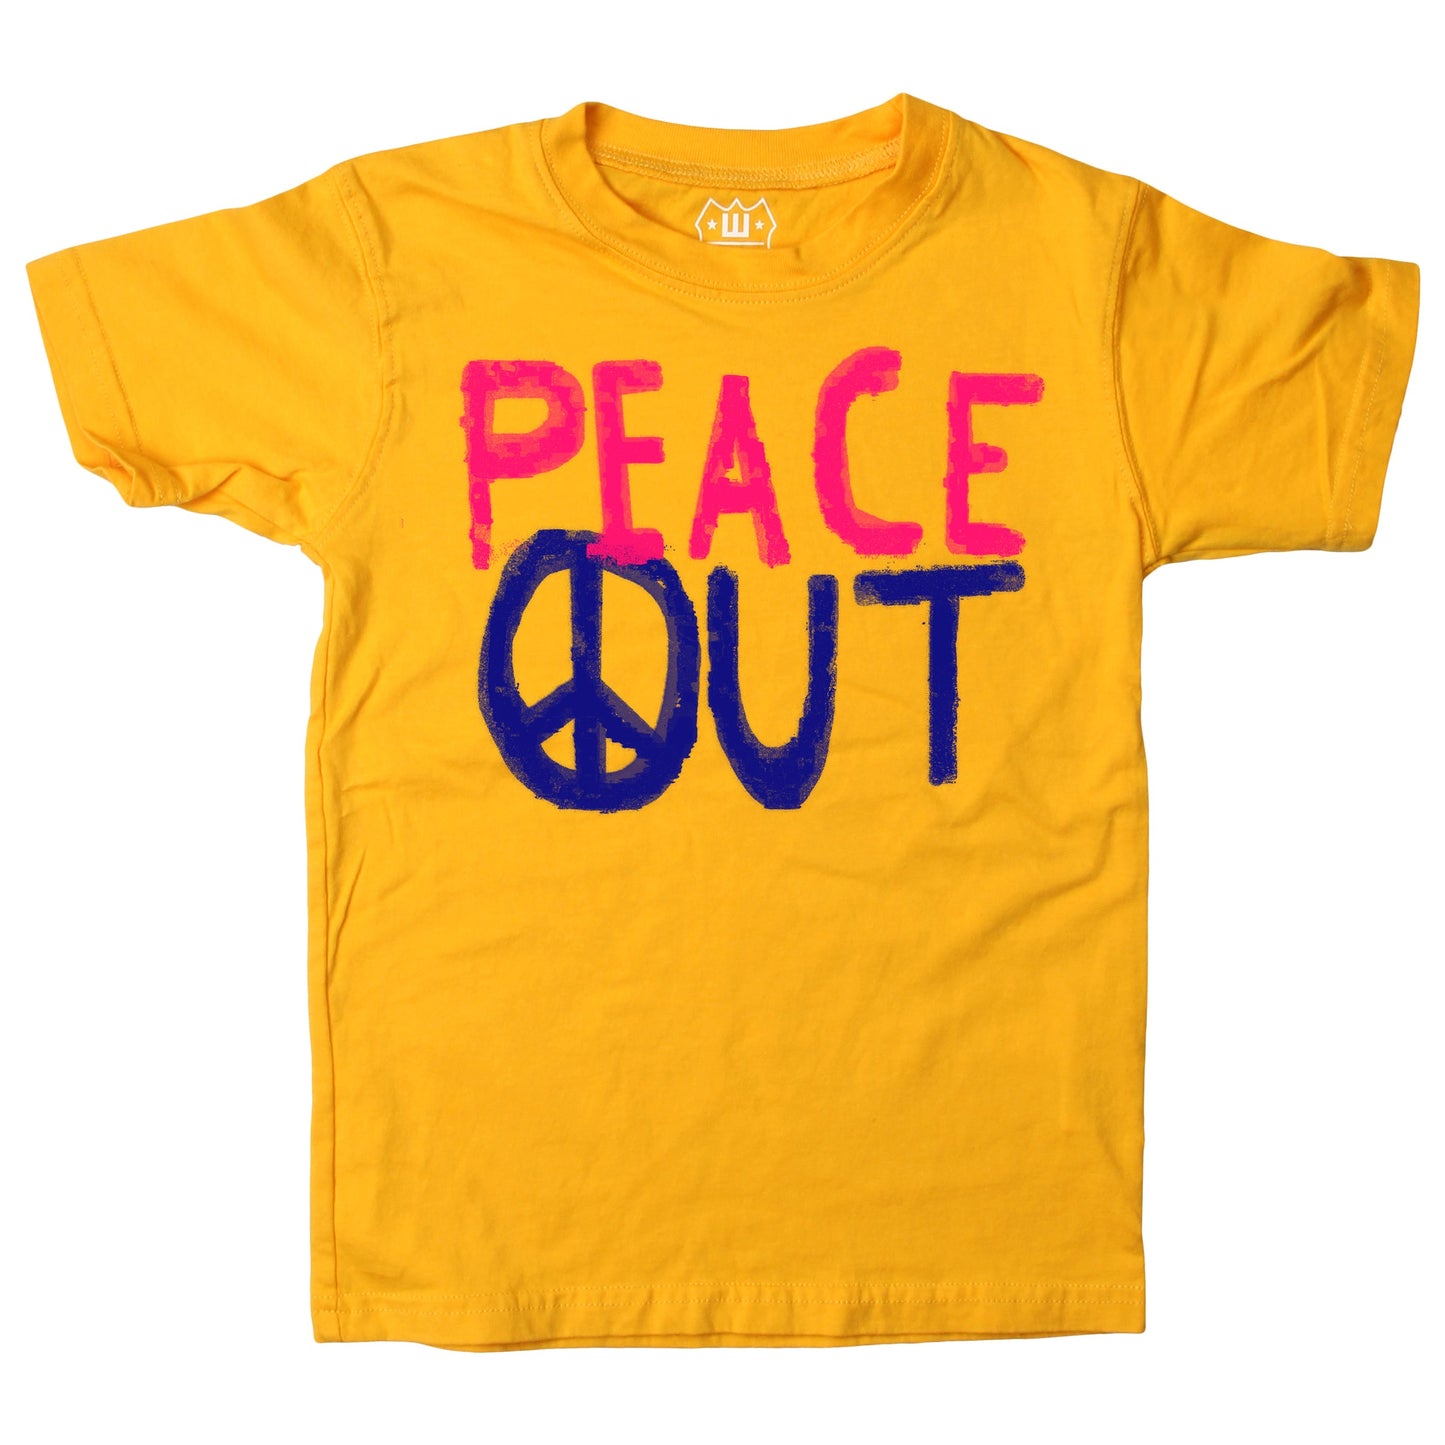 Youth Boys Peace Out Tee